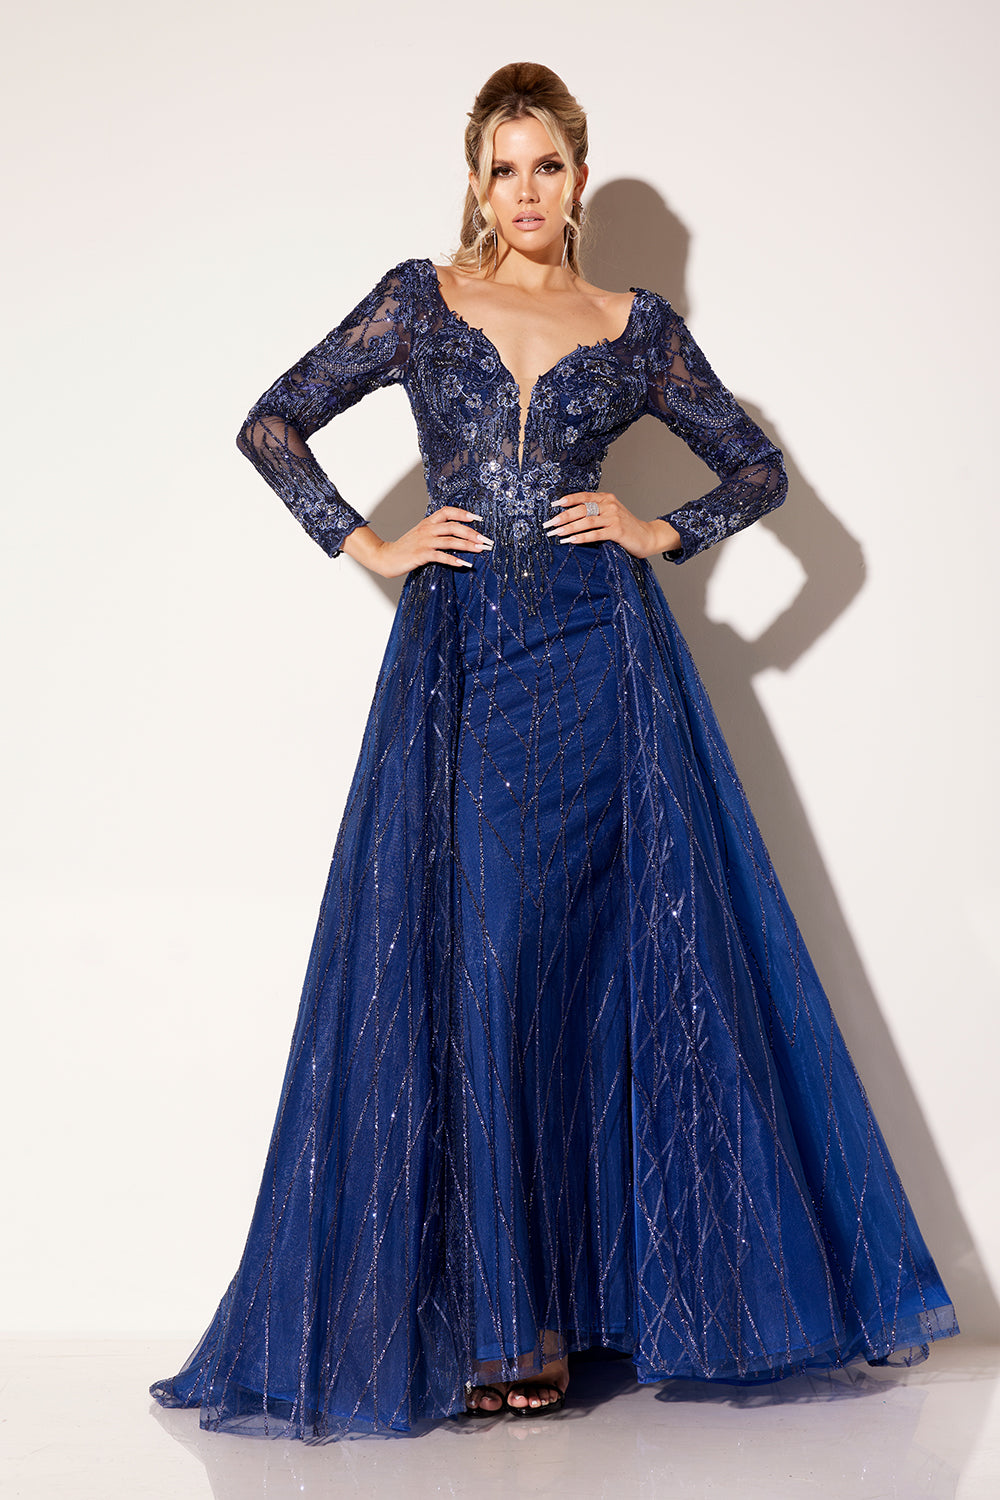 Lucci-Lu-C8076-V-Neck-Neckline-Open-Back-Sweep-Train-Embroidered-TulleA-Line-Navy-Evening-Dress-B-Chic-Fashions-Prom-Dress